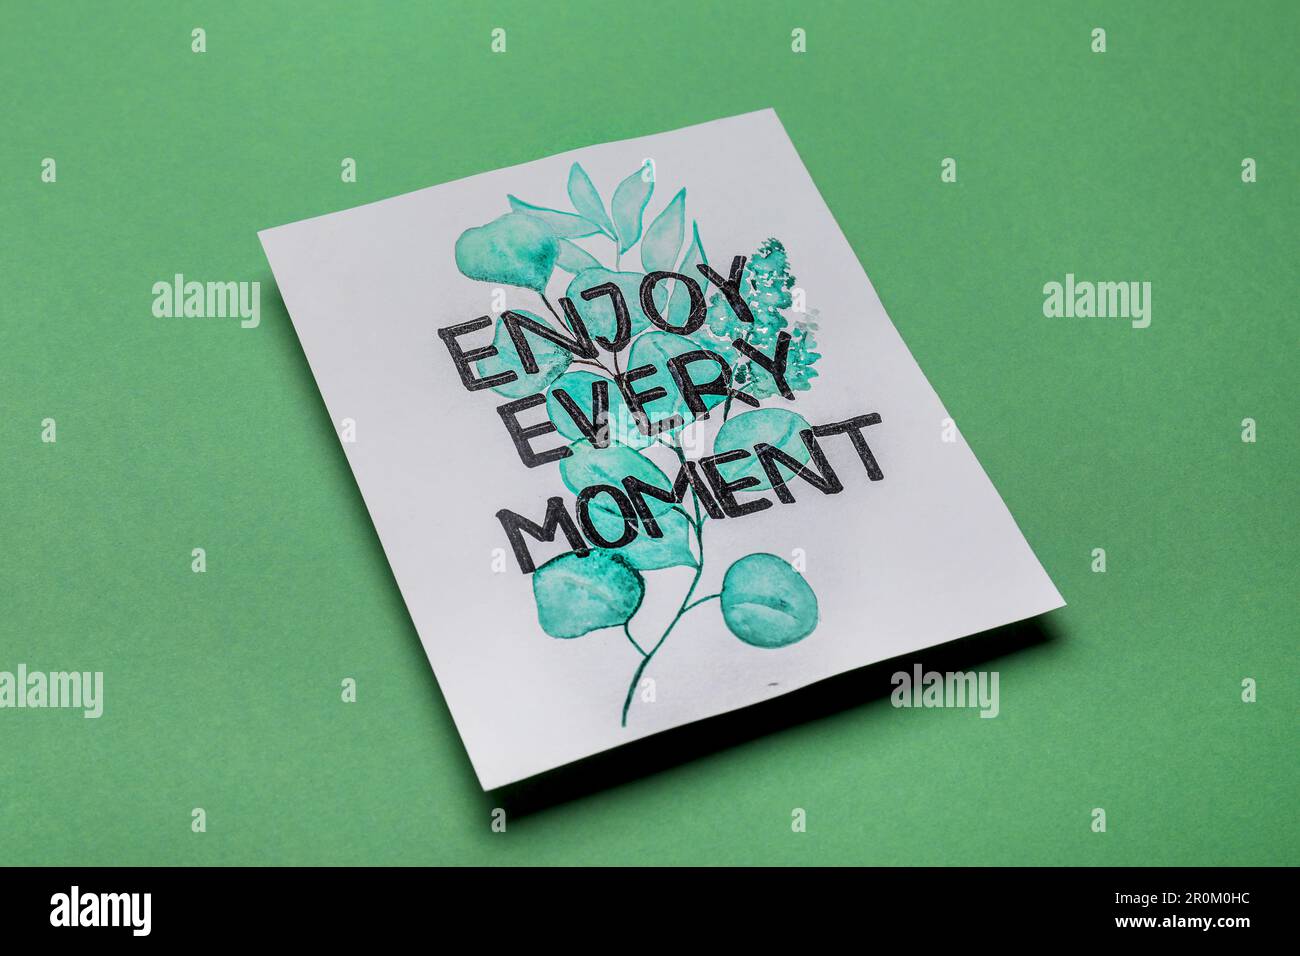 Card with phrase Enjoy Every Moment on green background Stock Photo